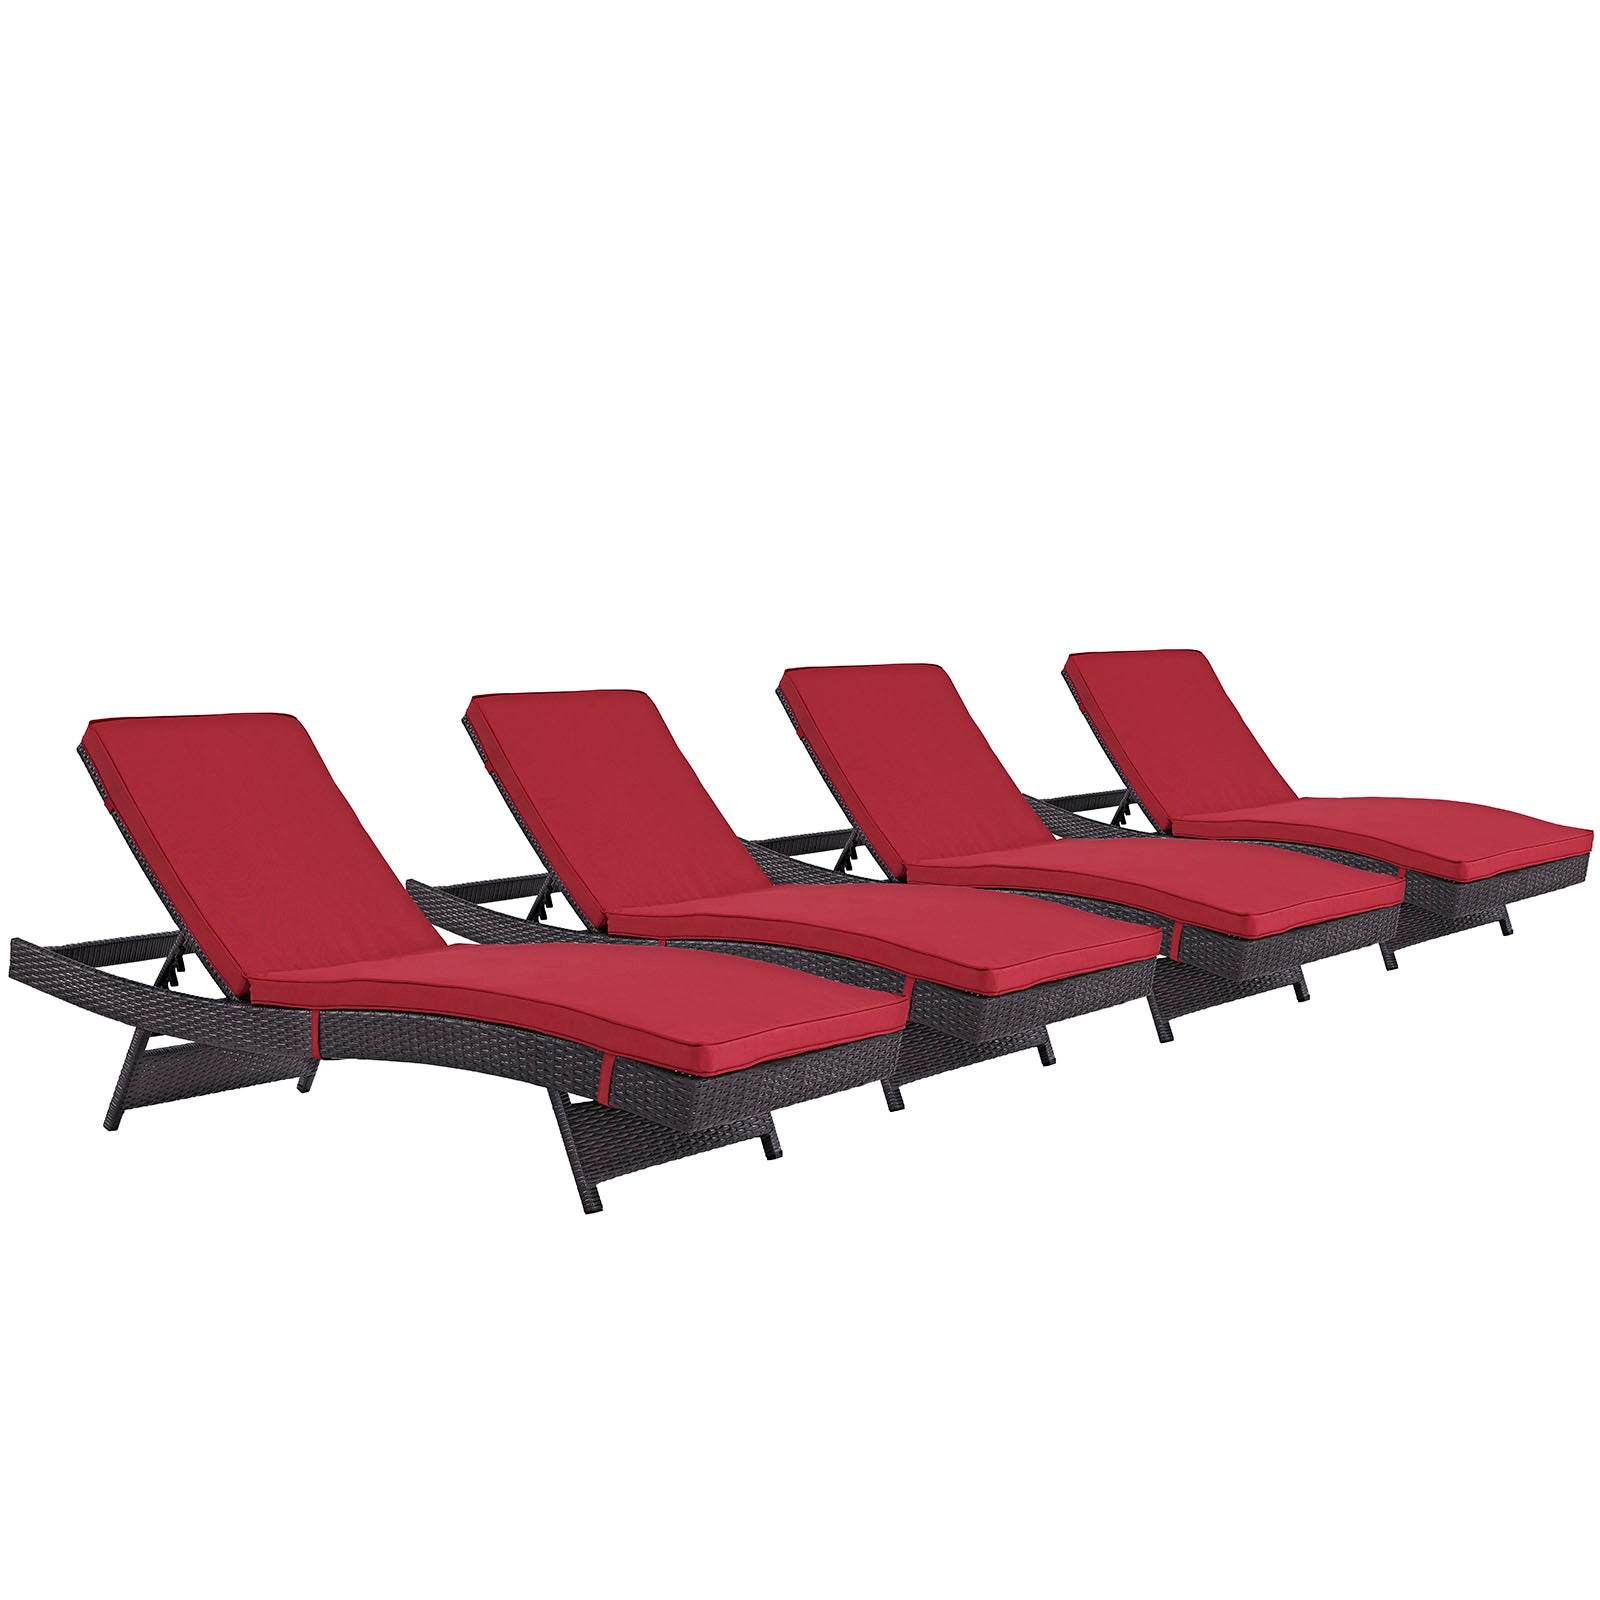 Modway Outdoor Loungers - Convene Chaise Outdoor Patio Set of 4 Espresso Red